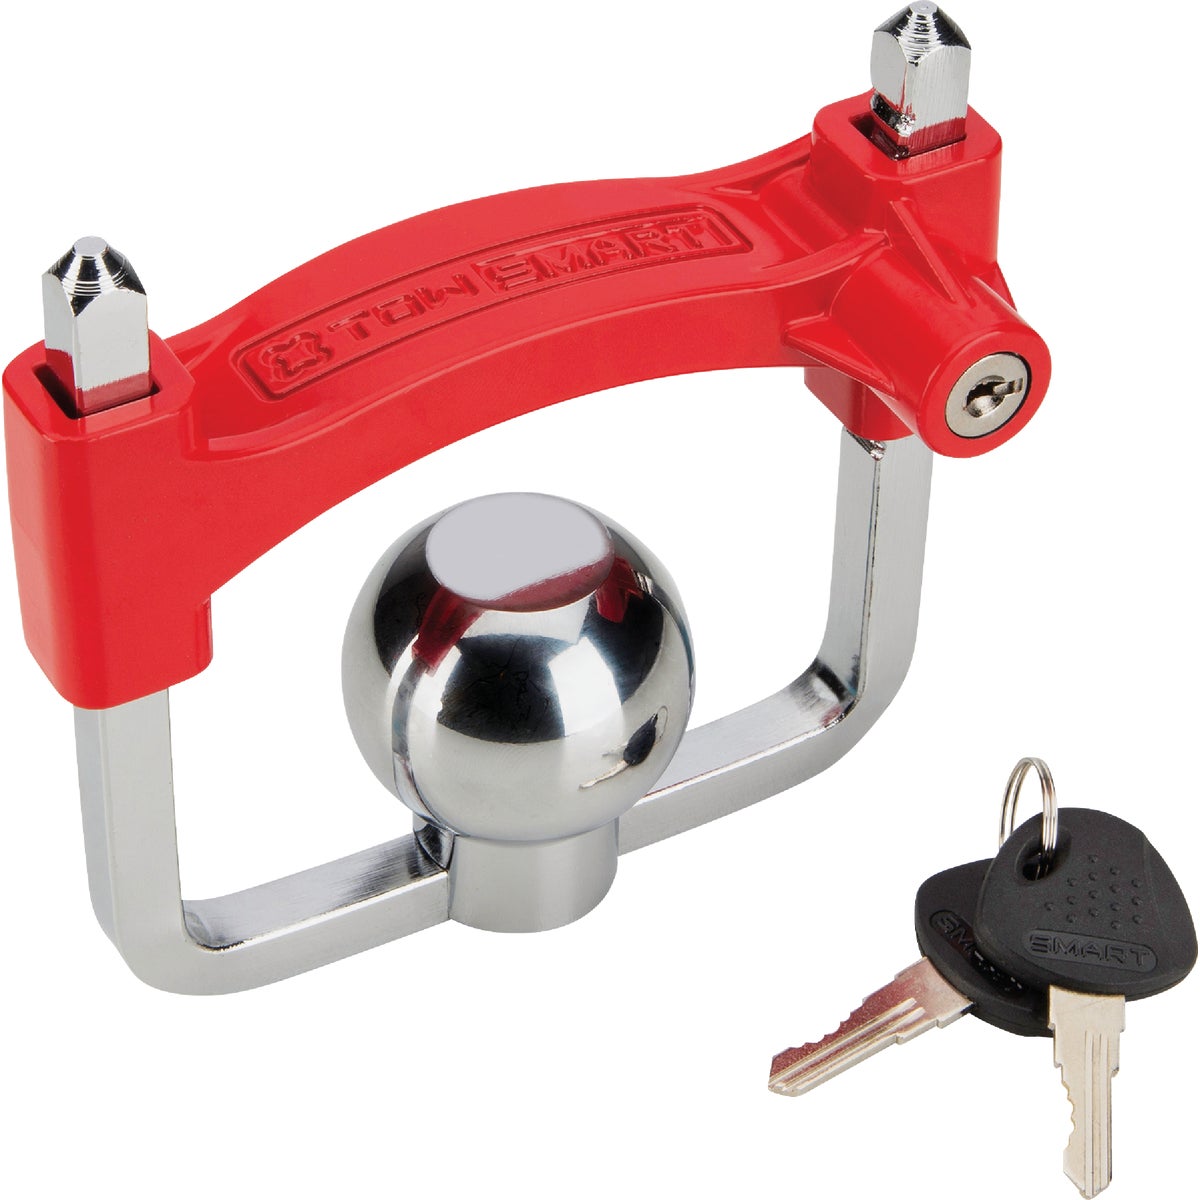 Item 573256, The Universal Coupler Lock protects your boats, campers, trailers, 